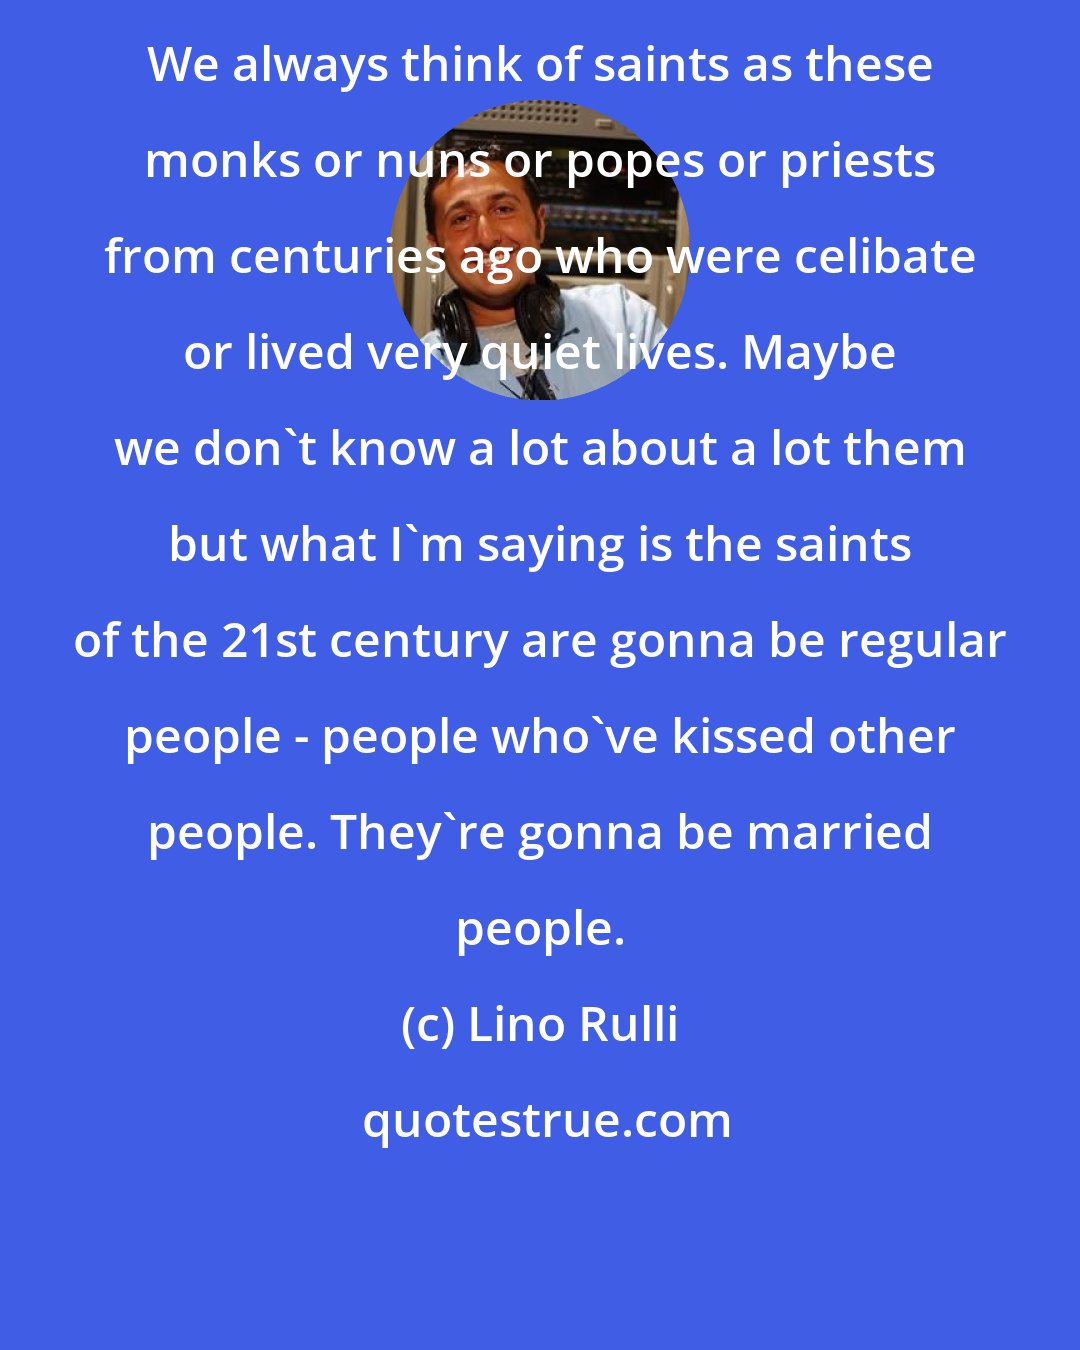 Lino Rulli: We always think of saints as these monks or nuns or popes or priests from centuries ago who were celibate or lived very quiet lives. Maybe we don't know a lot about a lot them but what I'm saying is the saints of the 21st century are gonna be regular people - people who've kissed other people. They're gonna be married people.